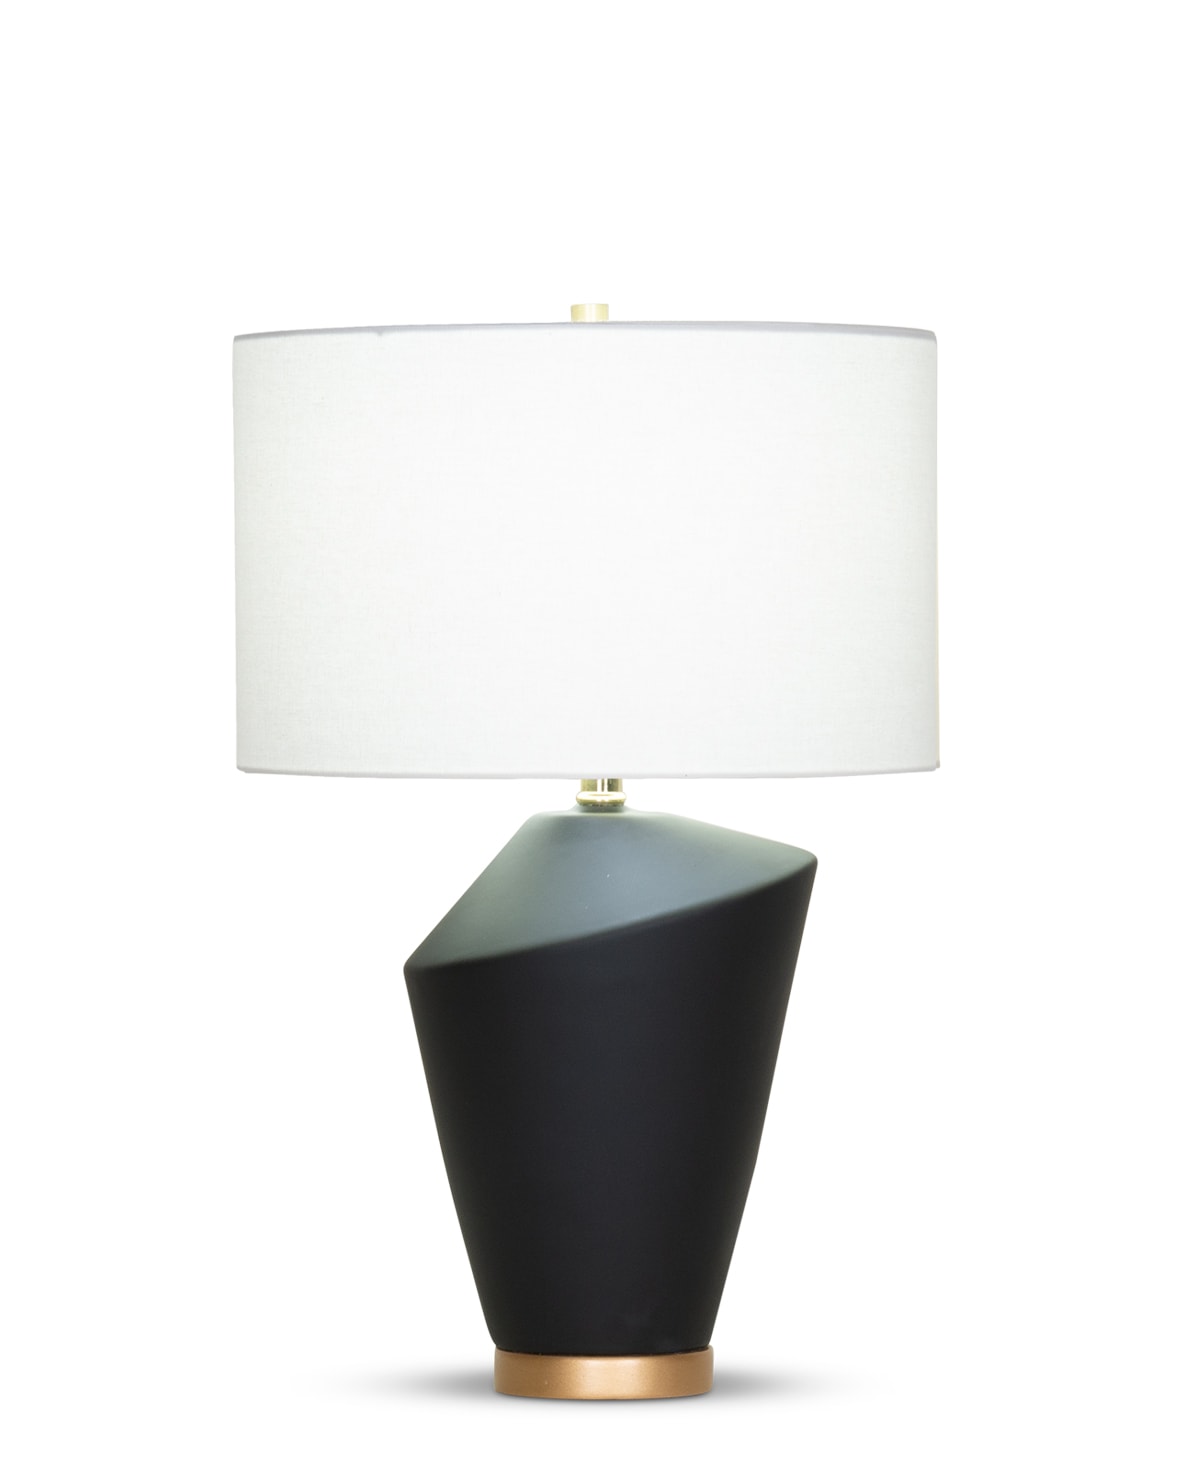 FlowDecor Gavin Table Lamp in ceramic with black matte finish and resin base with gold finish and off-white linen drum shade (# 4371)